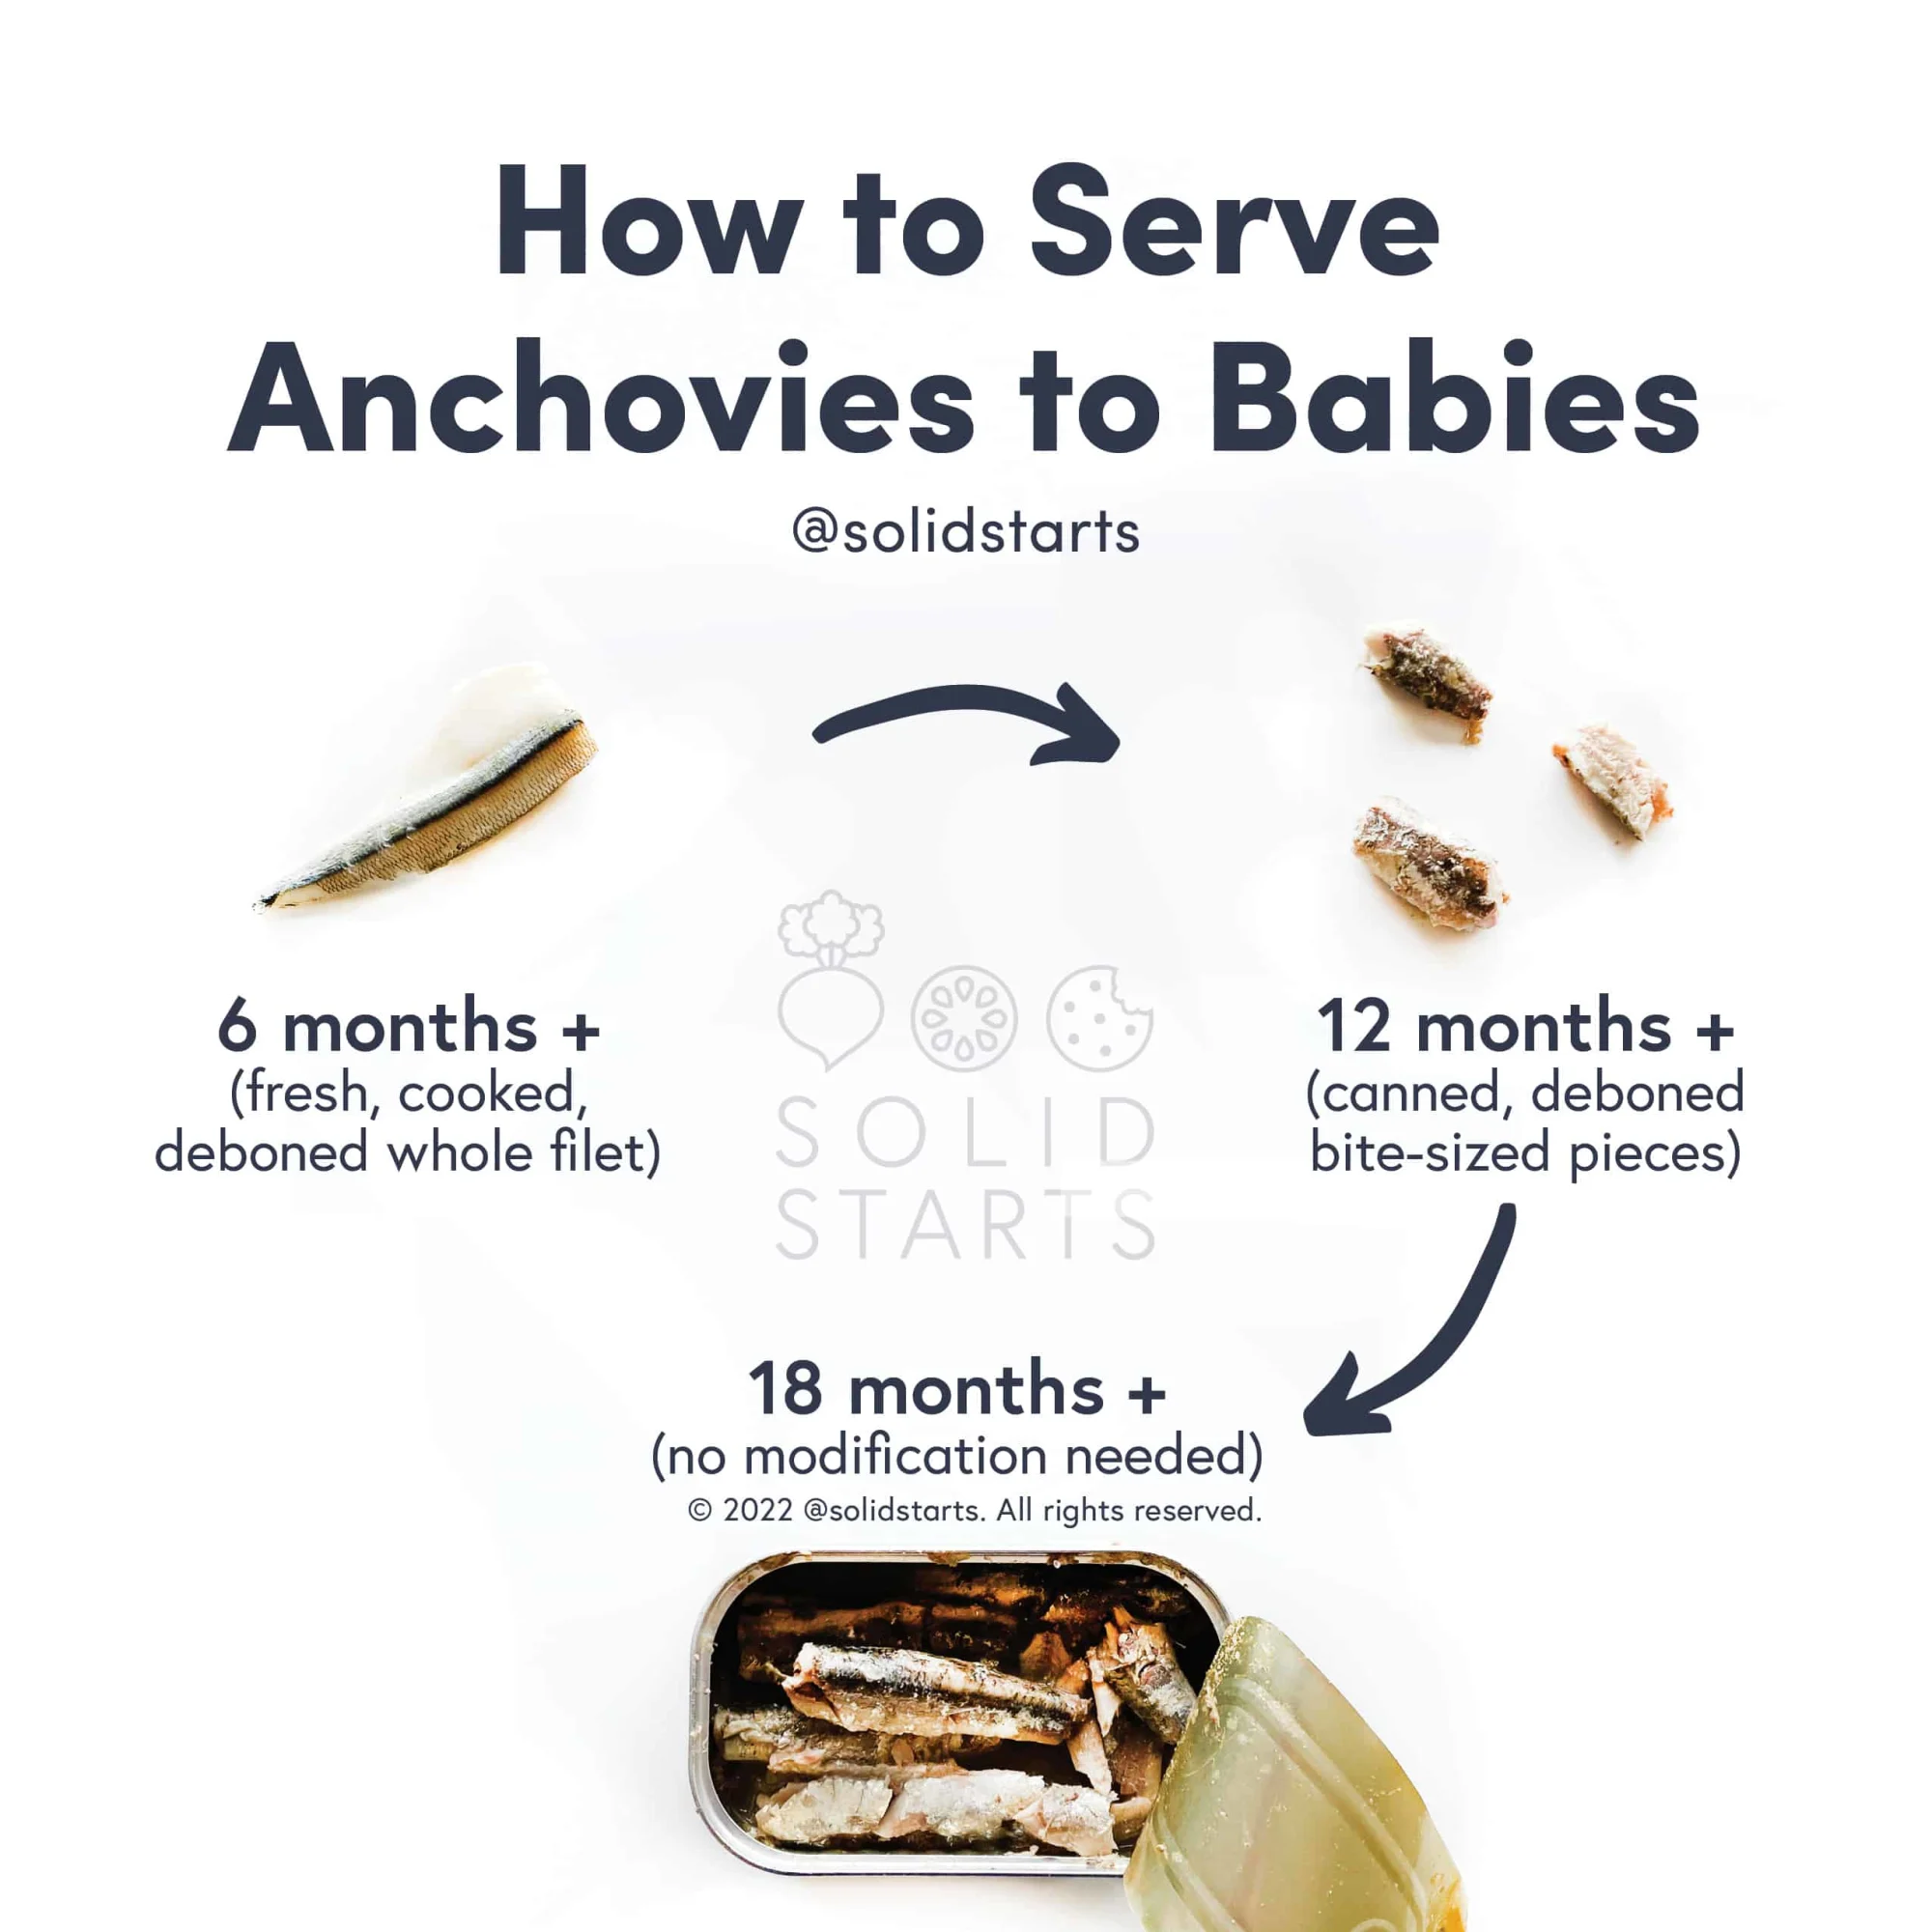 a Solid Starts infographic with the header How to Serve Anchovies to Babies: whole, cooked deboned filet (only when cooked from fresh) for 6 mos+, bite-size pieces of canned anchovy for 12 mos+, and no modifications for canned anchovies for18 mos+